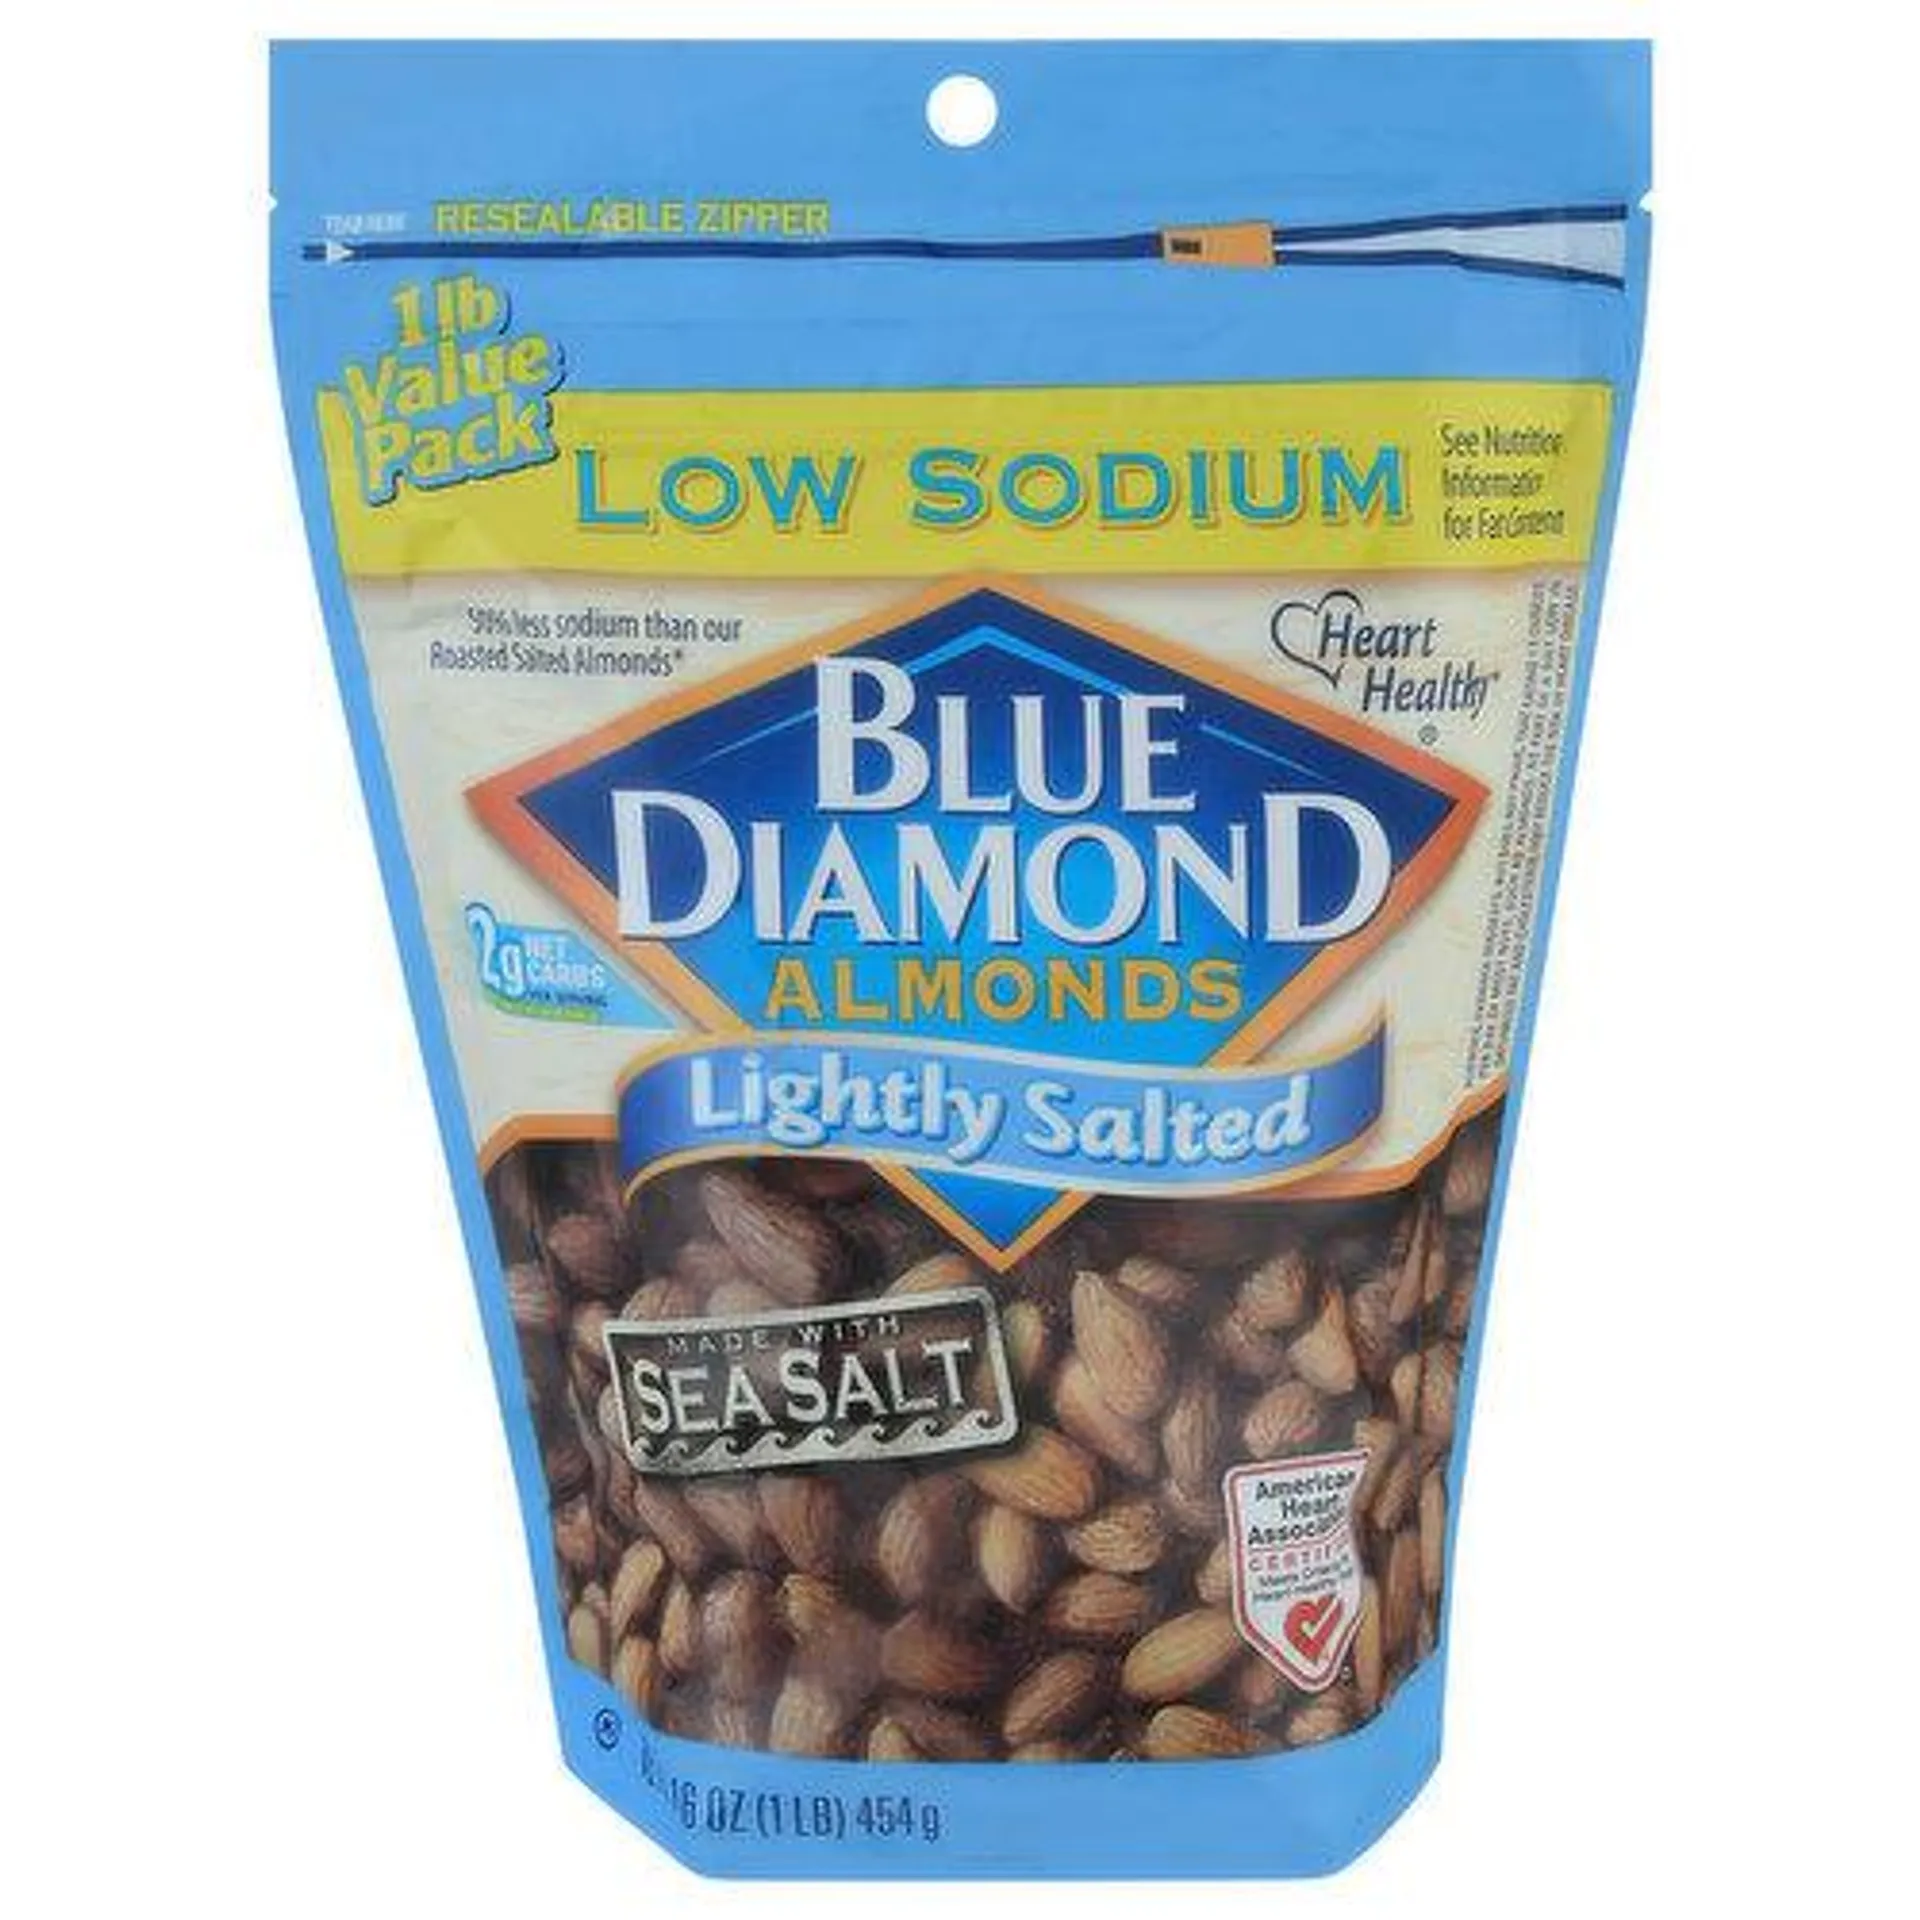 Blue Diamond Almonds, Lightly Salted, Low Sodium, Value Pack - 16 Ounce